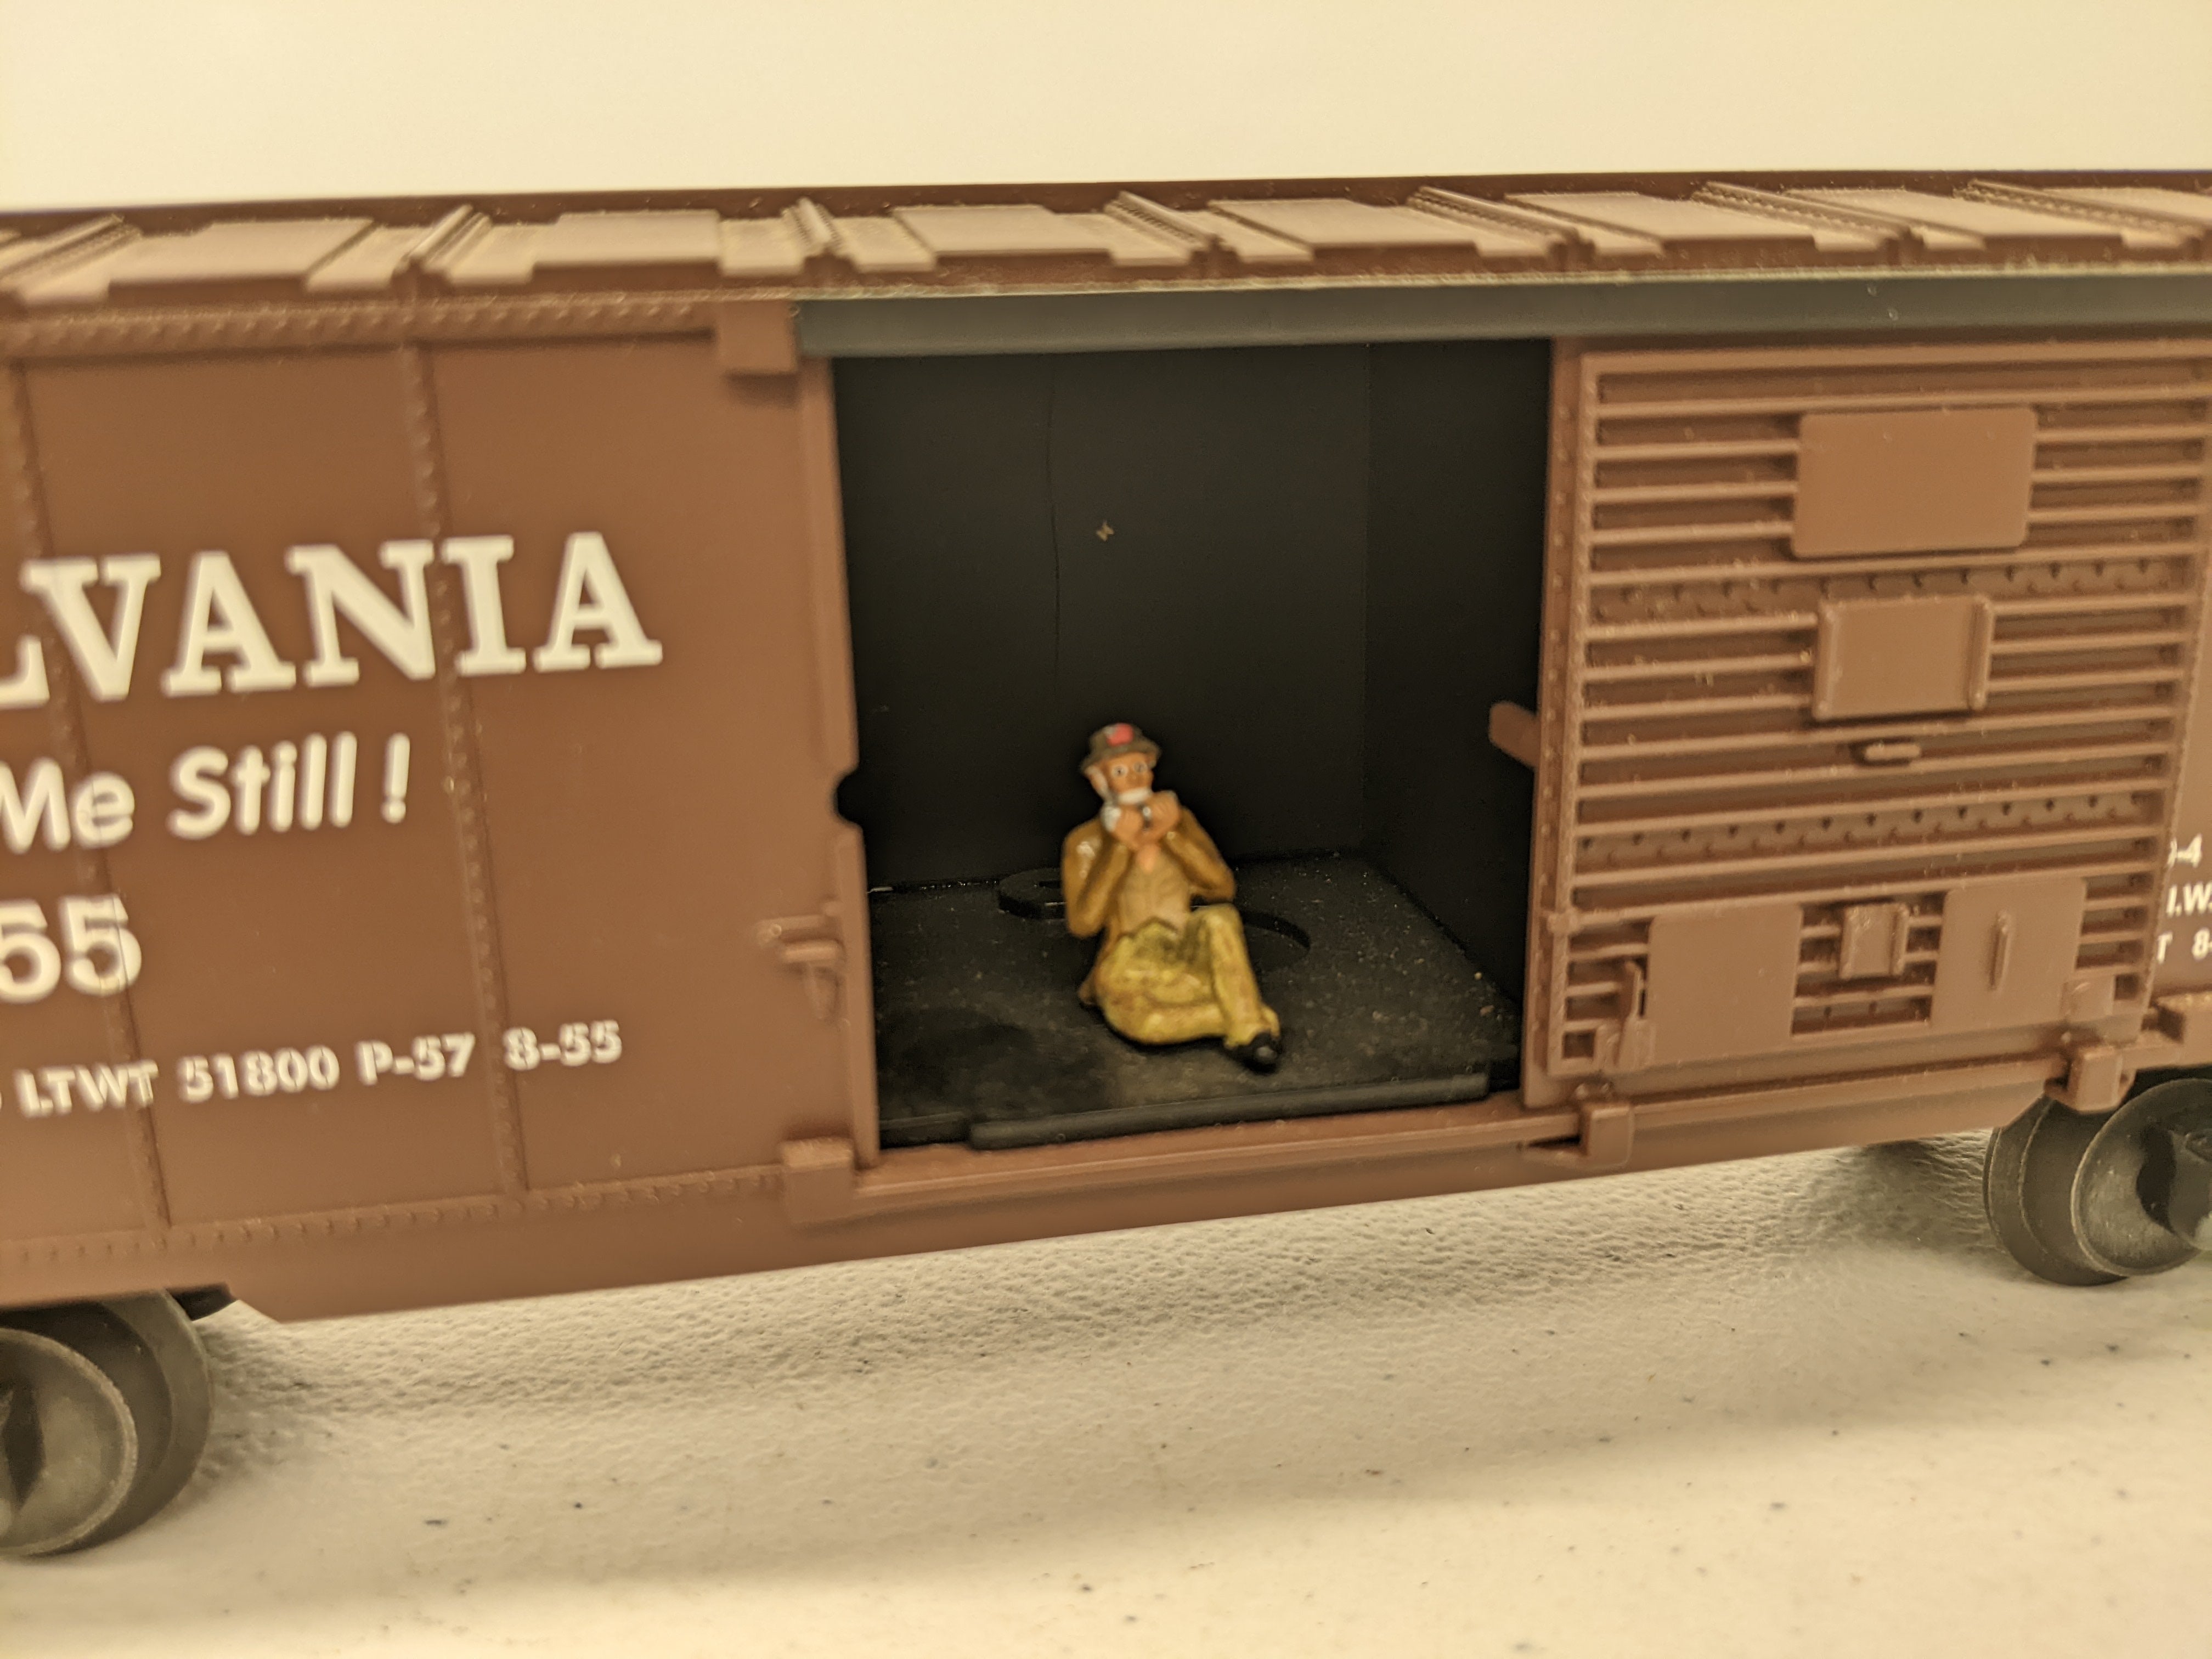 USED Lionel 6-26815 O Scale, Box Car with Harmonica Sounds, Pennsylvania #24255, "Don't Stand Me Still"